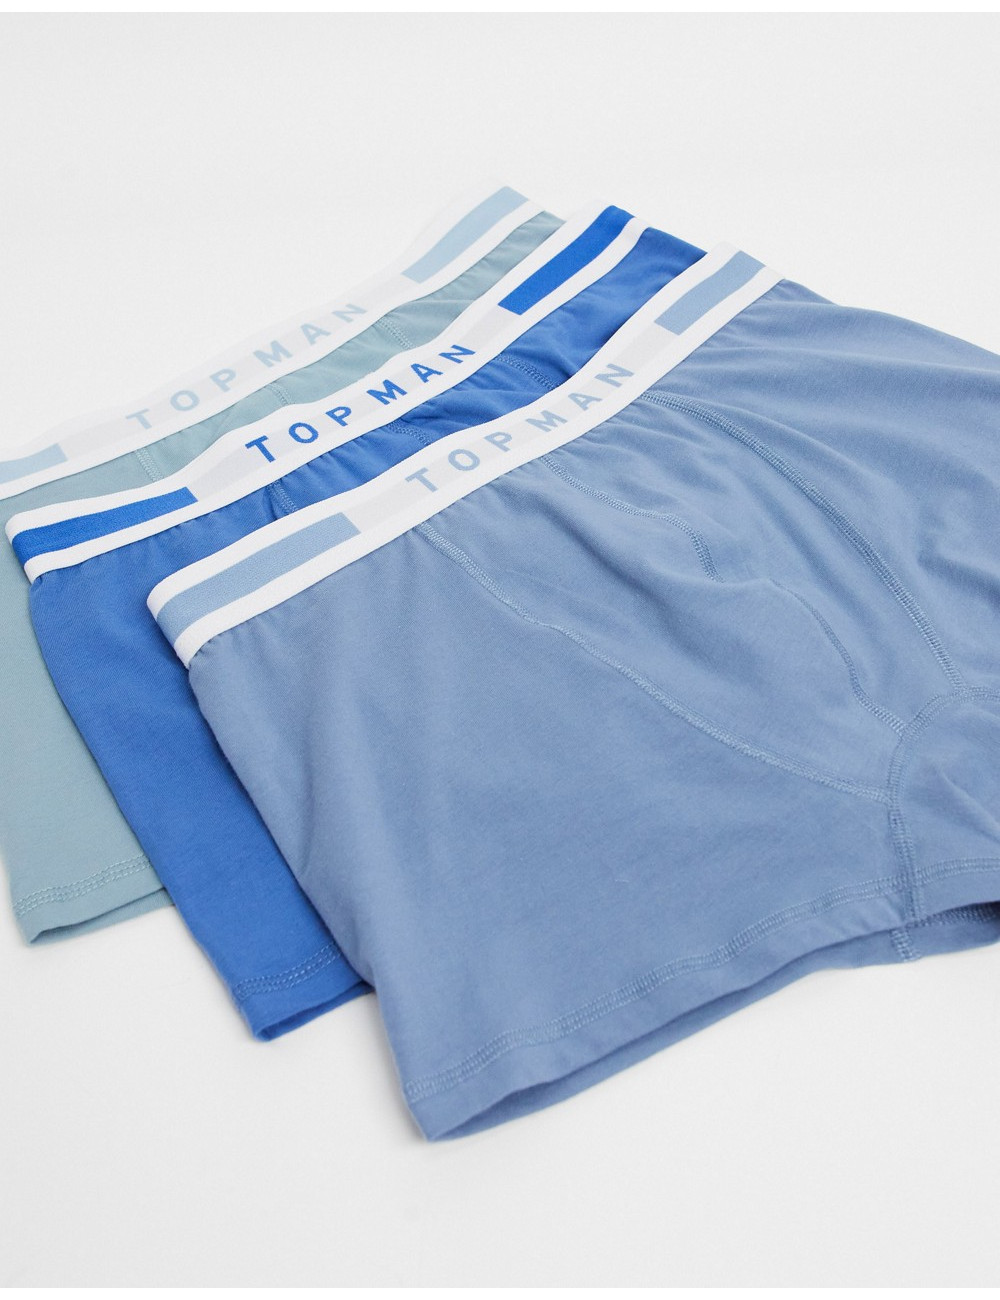 Topman trunks in shades of...